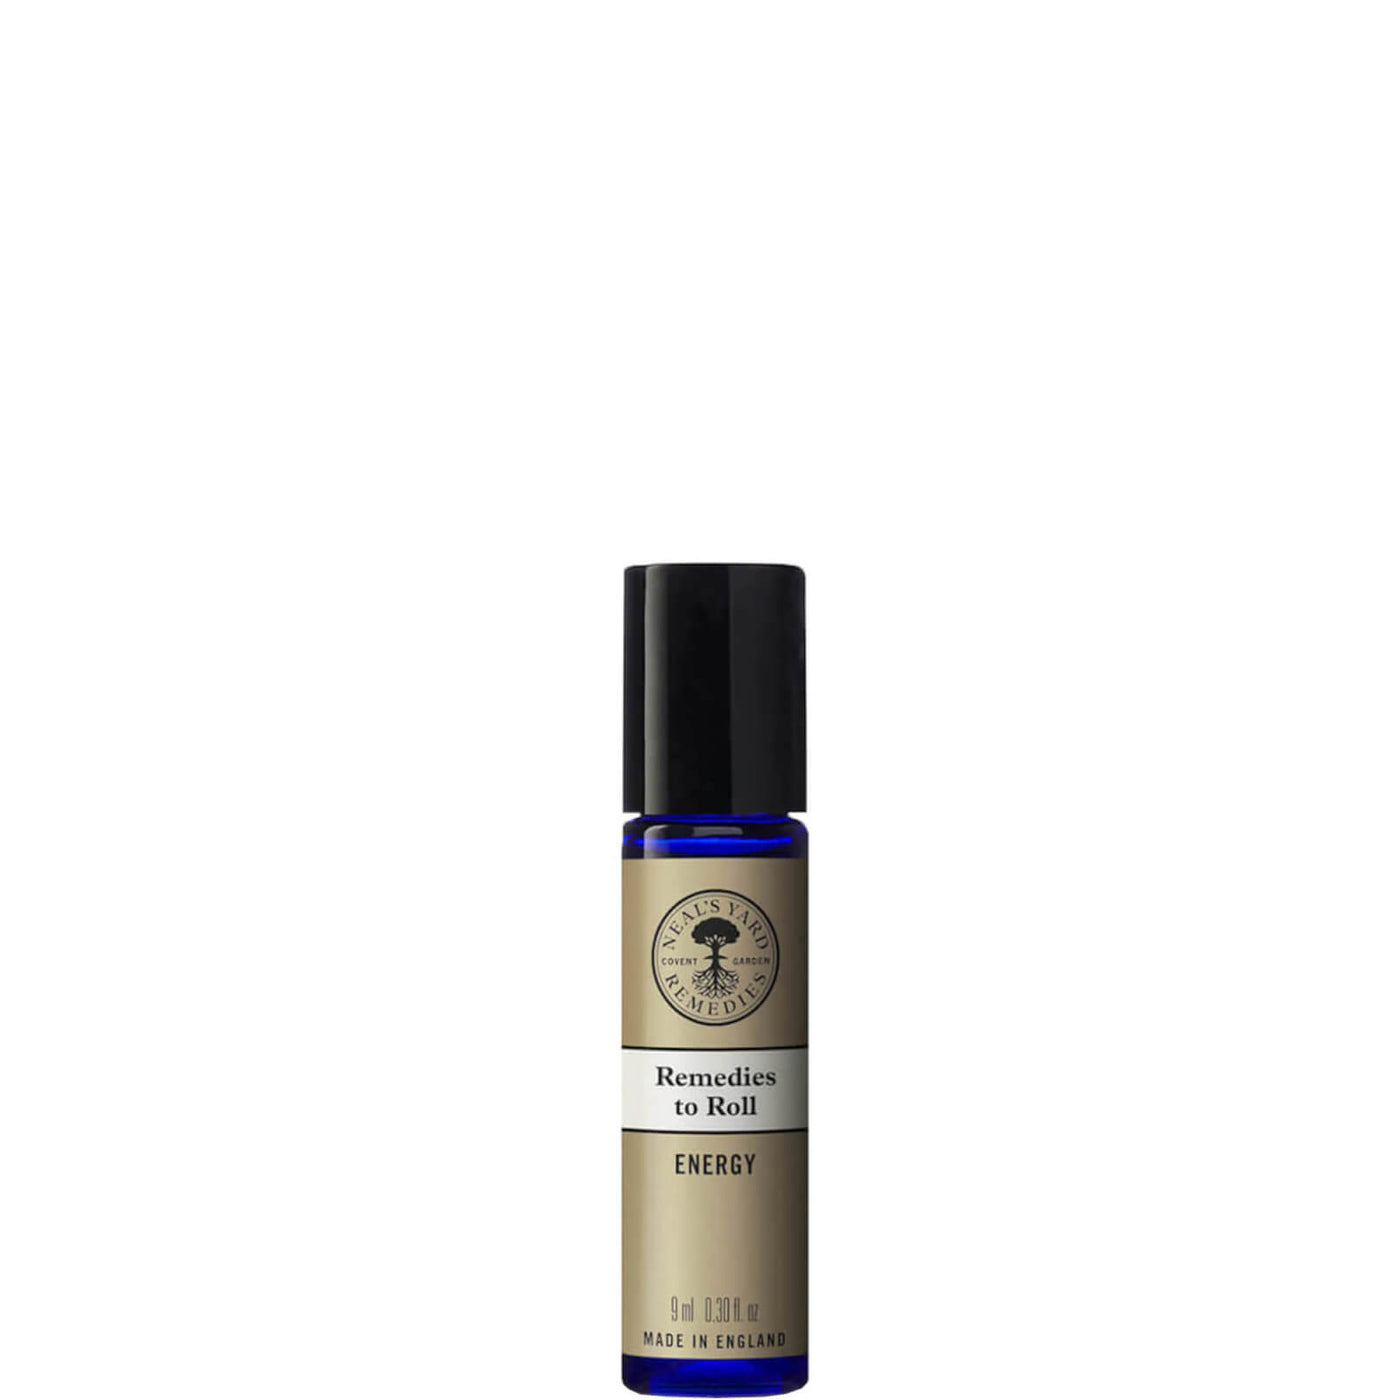 Neal's Yard Remedies to Roll Energy Blend 9ml